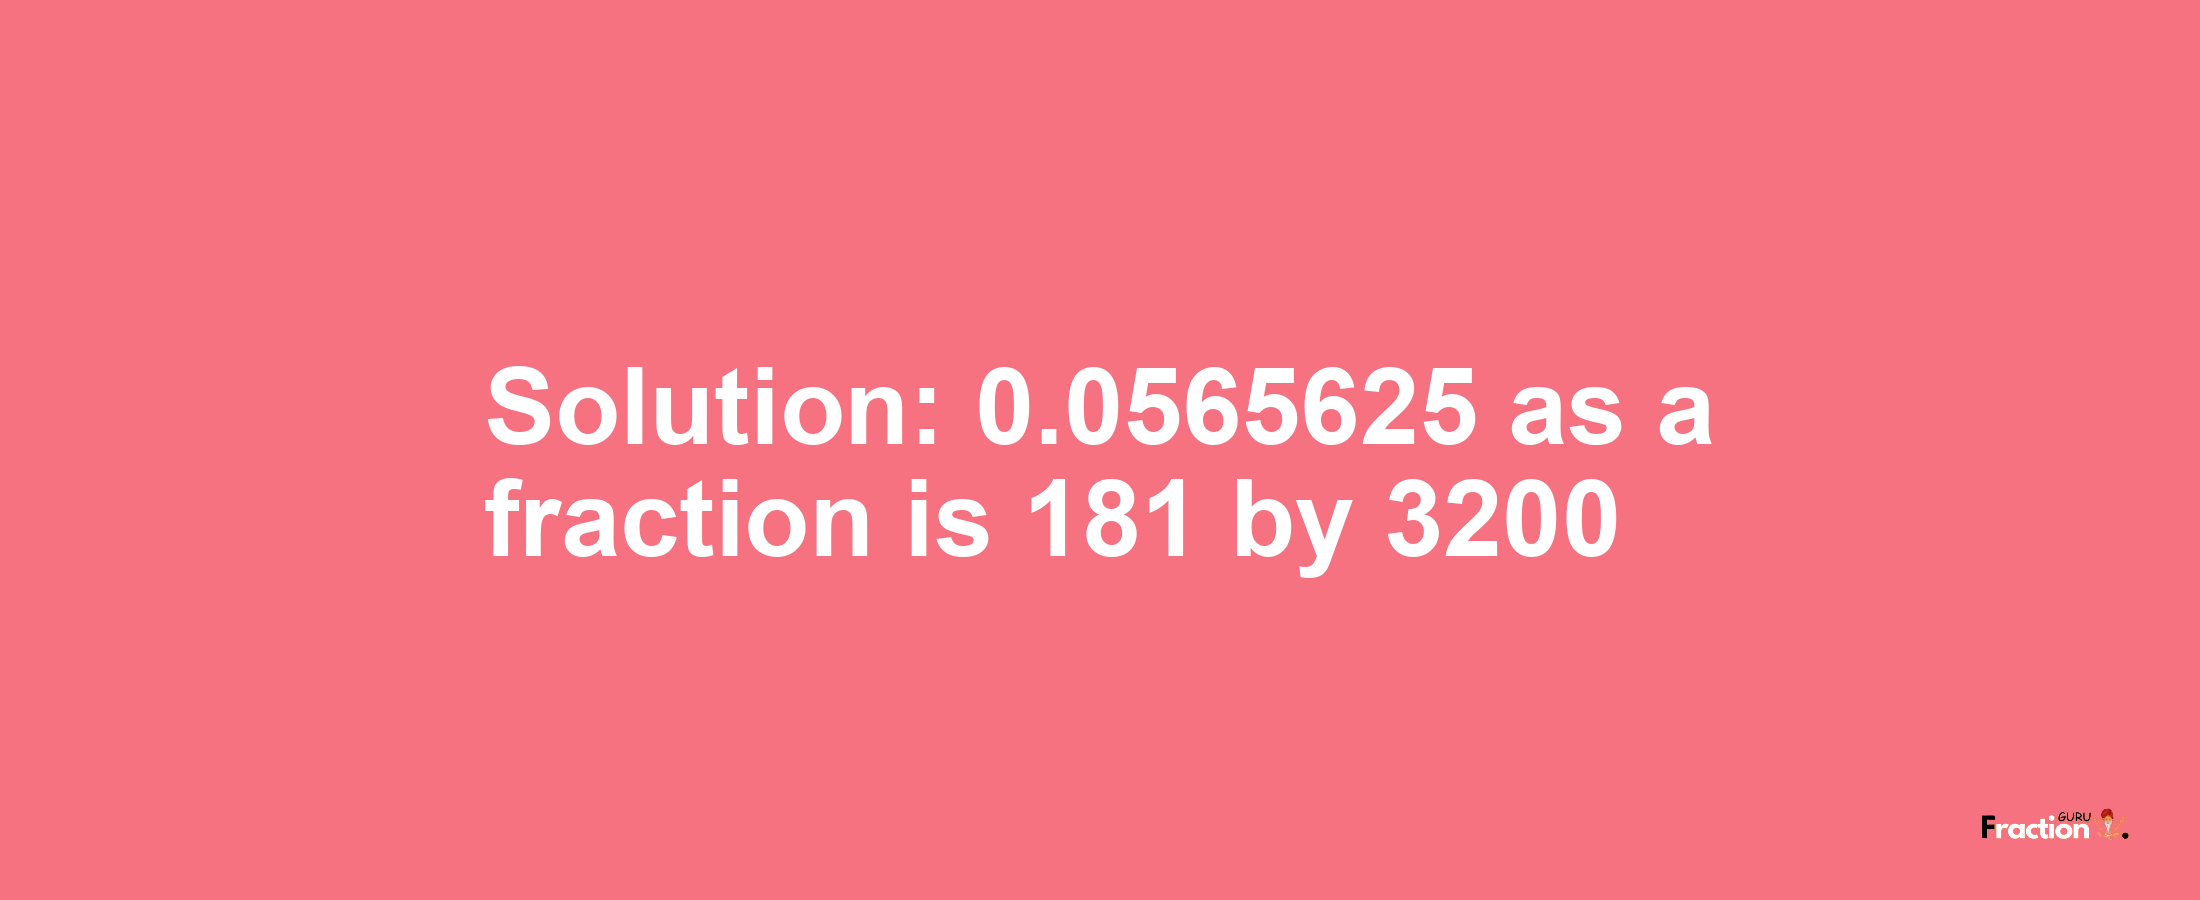 Solution:0.0565625 as a fraction is 181/3200